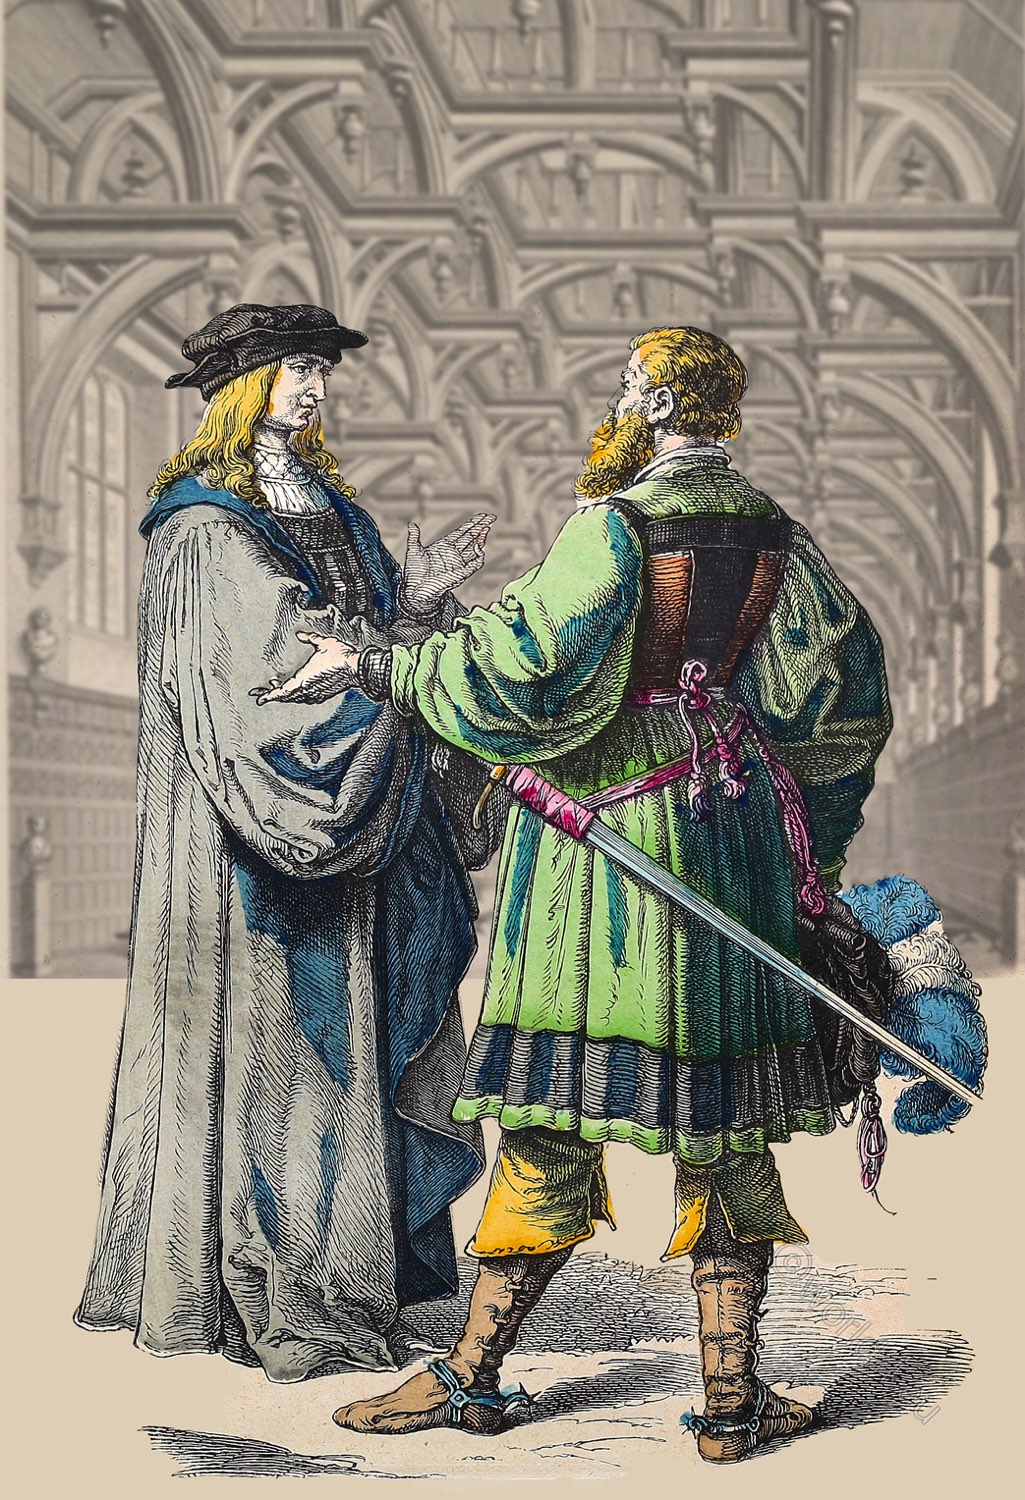 Early 16th century clothing of a German magistrate and knight.